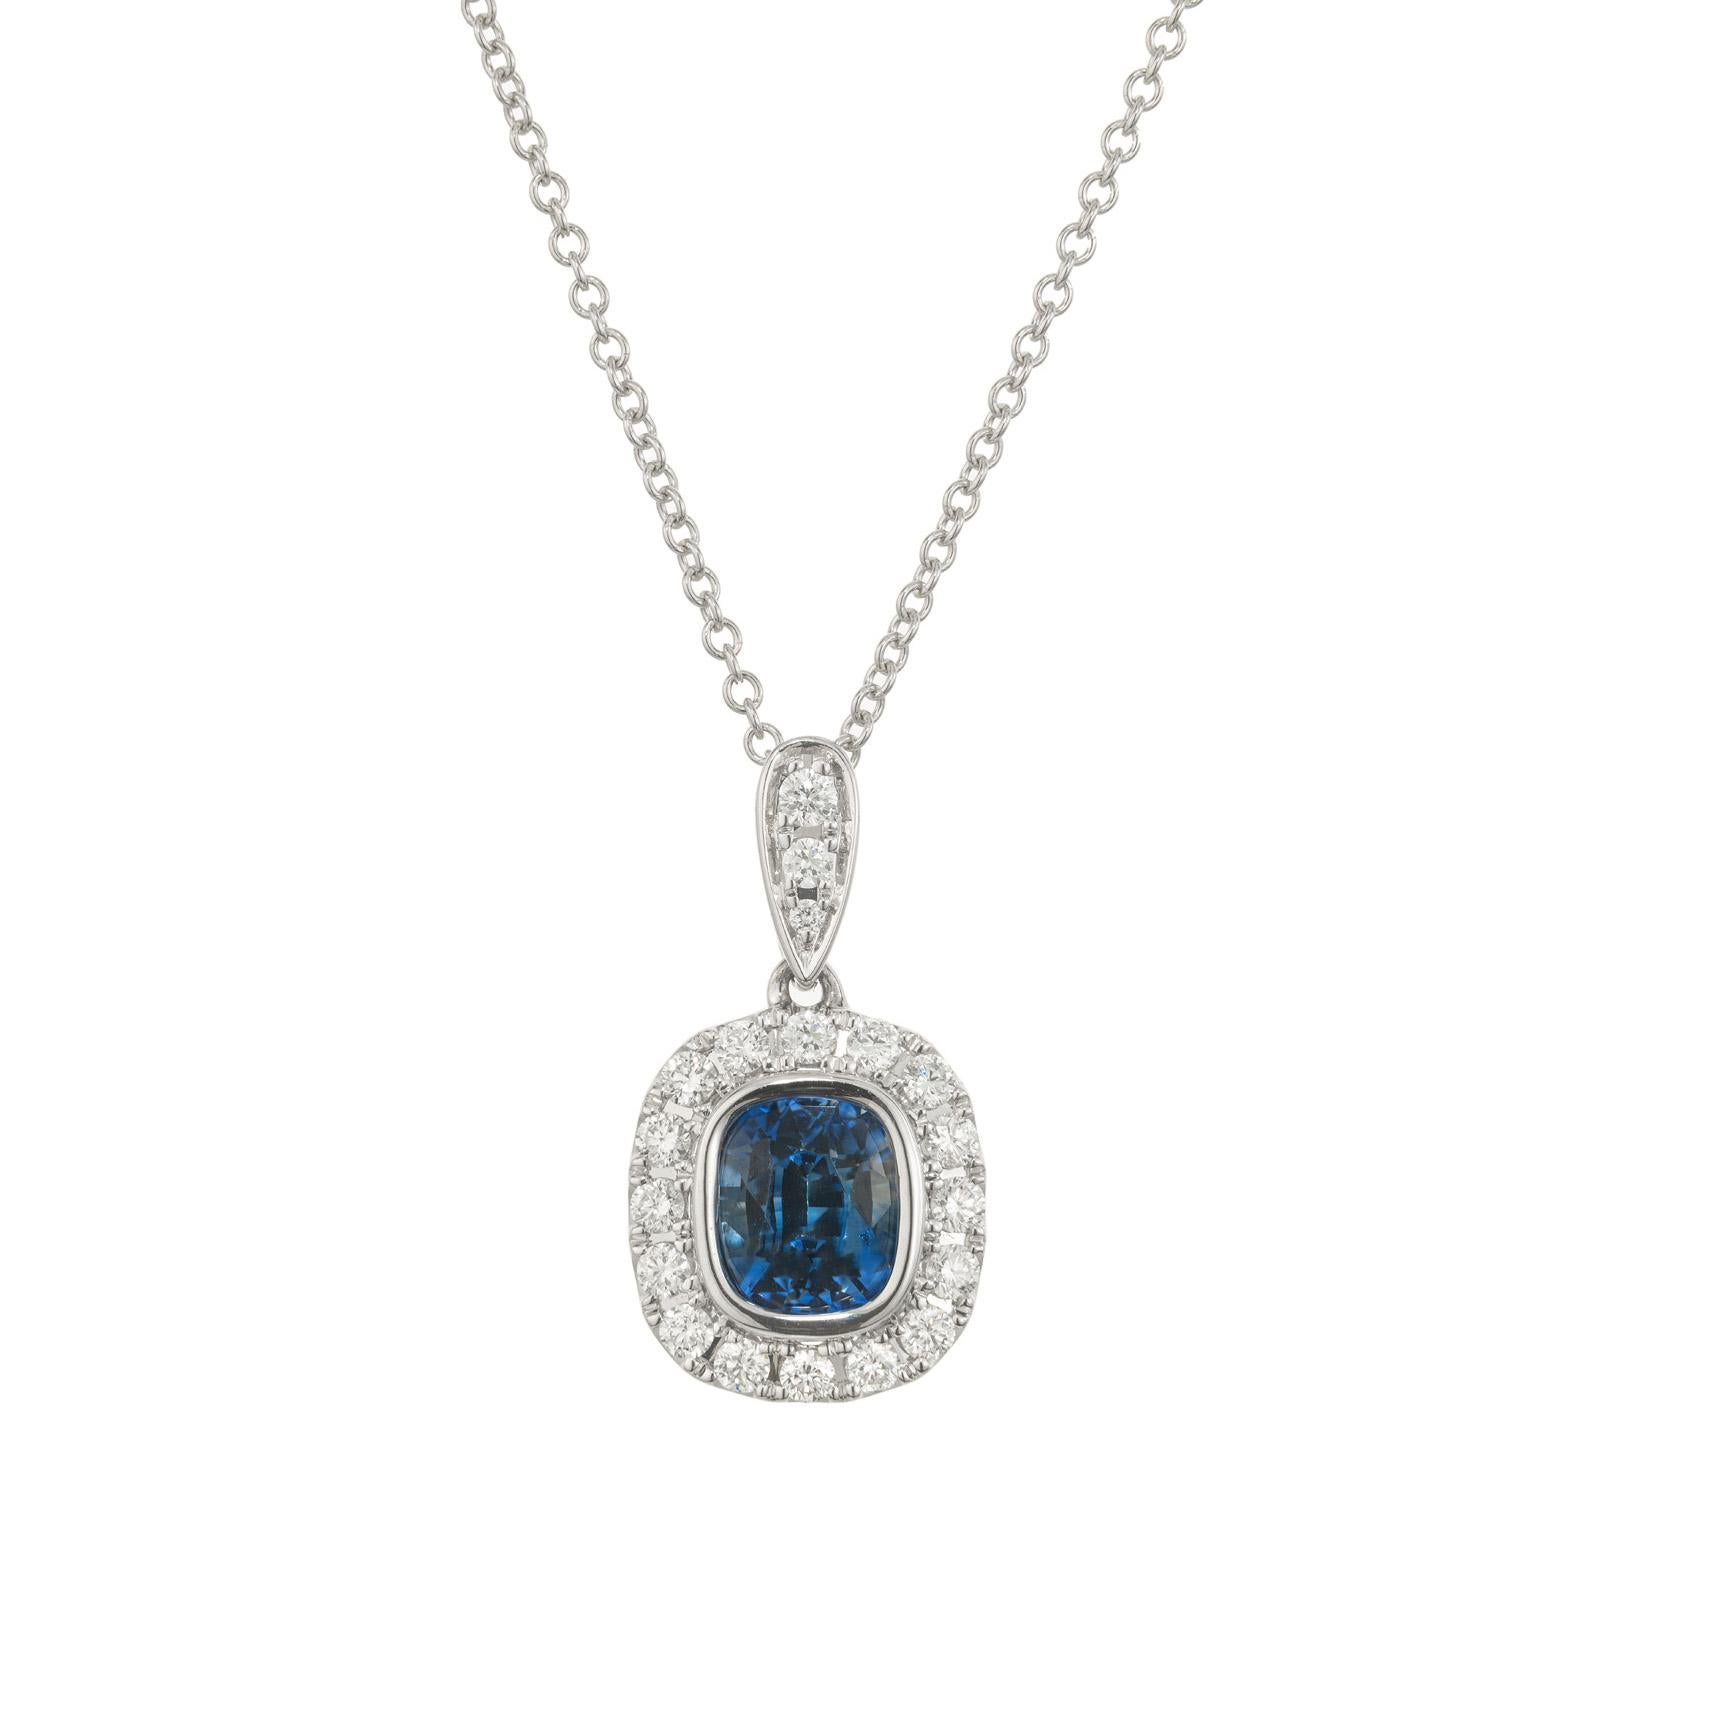 Sri Lankan periwinkle blue ICA certified cushion sapphire and diamond pendant necklace. At the center of this pendant is a cushion cut 1.05ct sapphire. Accented by a halo of full cut round diamonds. The 14k white gold chain is 18 inches in length.